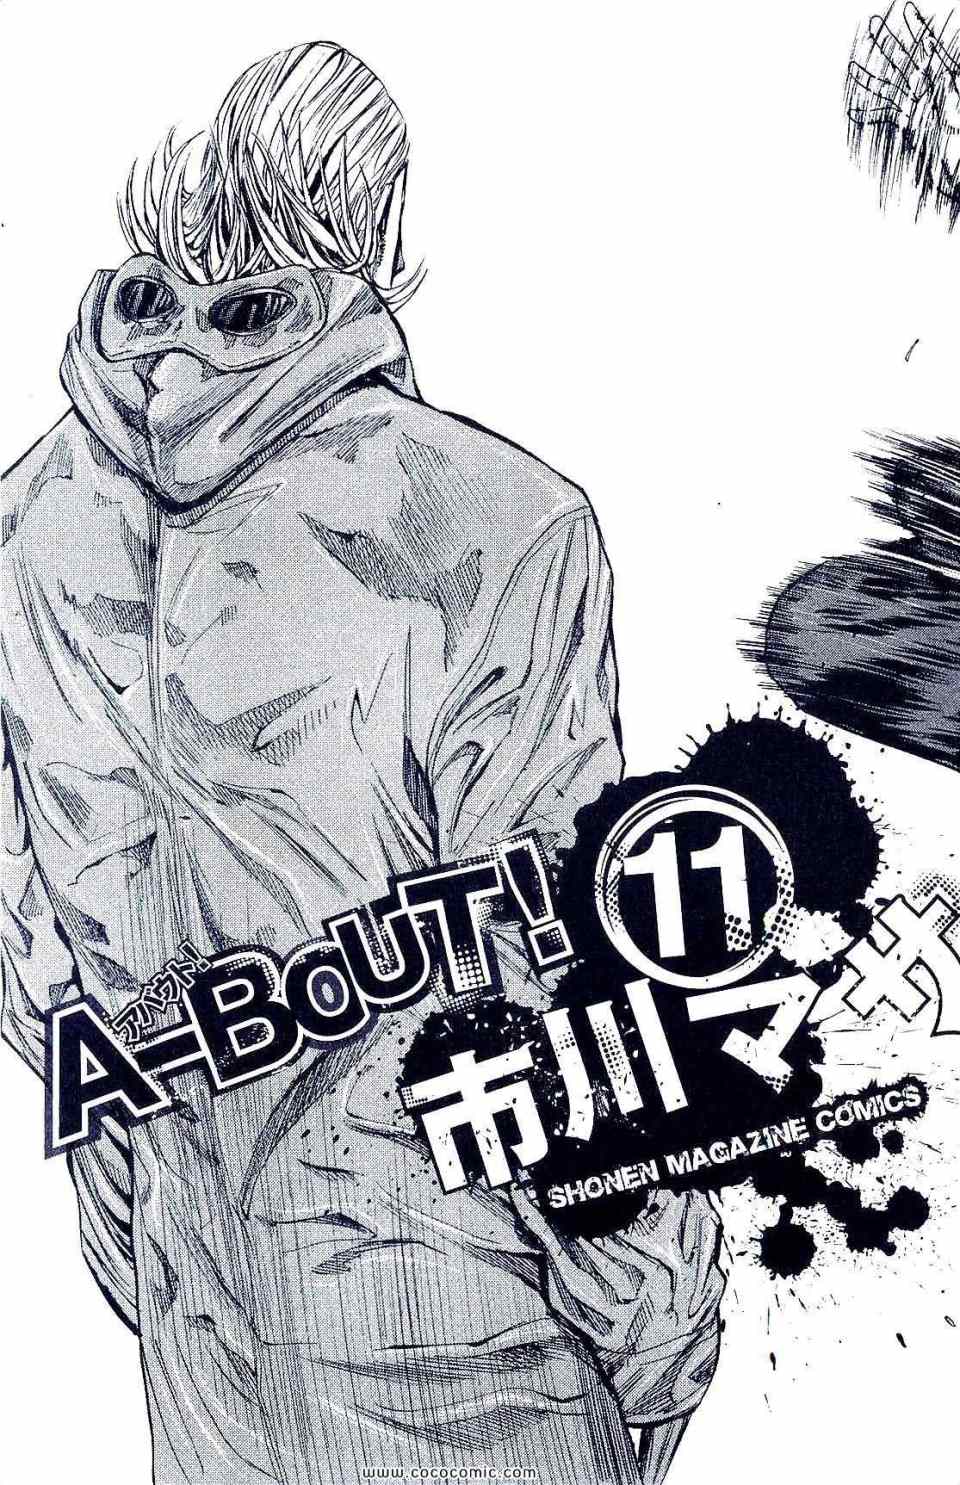 《A-BOUT!(日文)》漫画 A-BOUT! 11卷